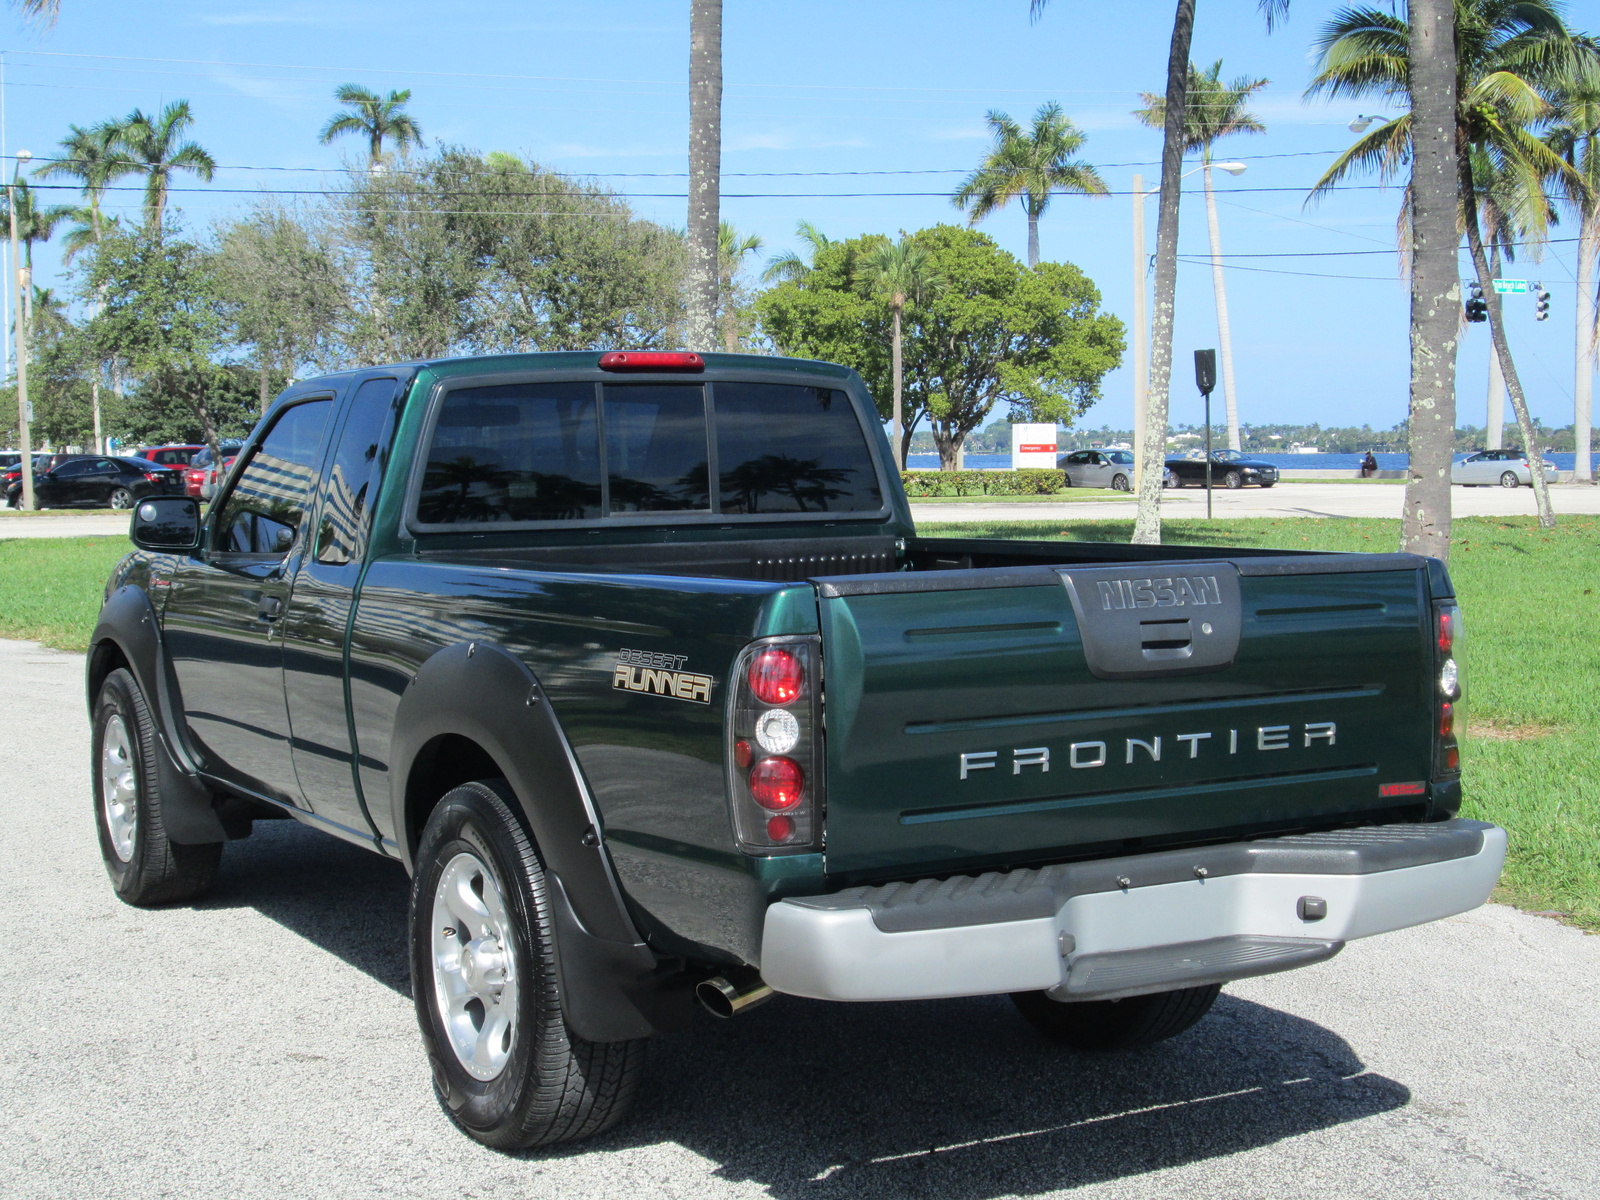 2001 Nissan frontier supercharged #1